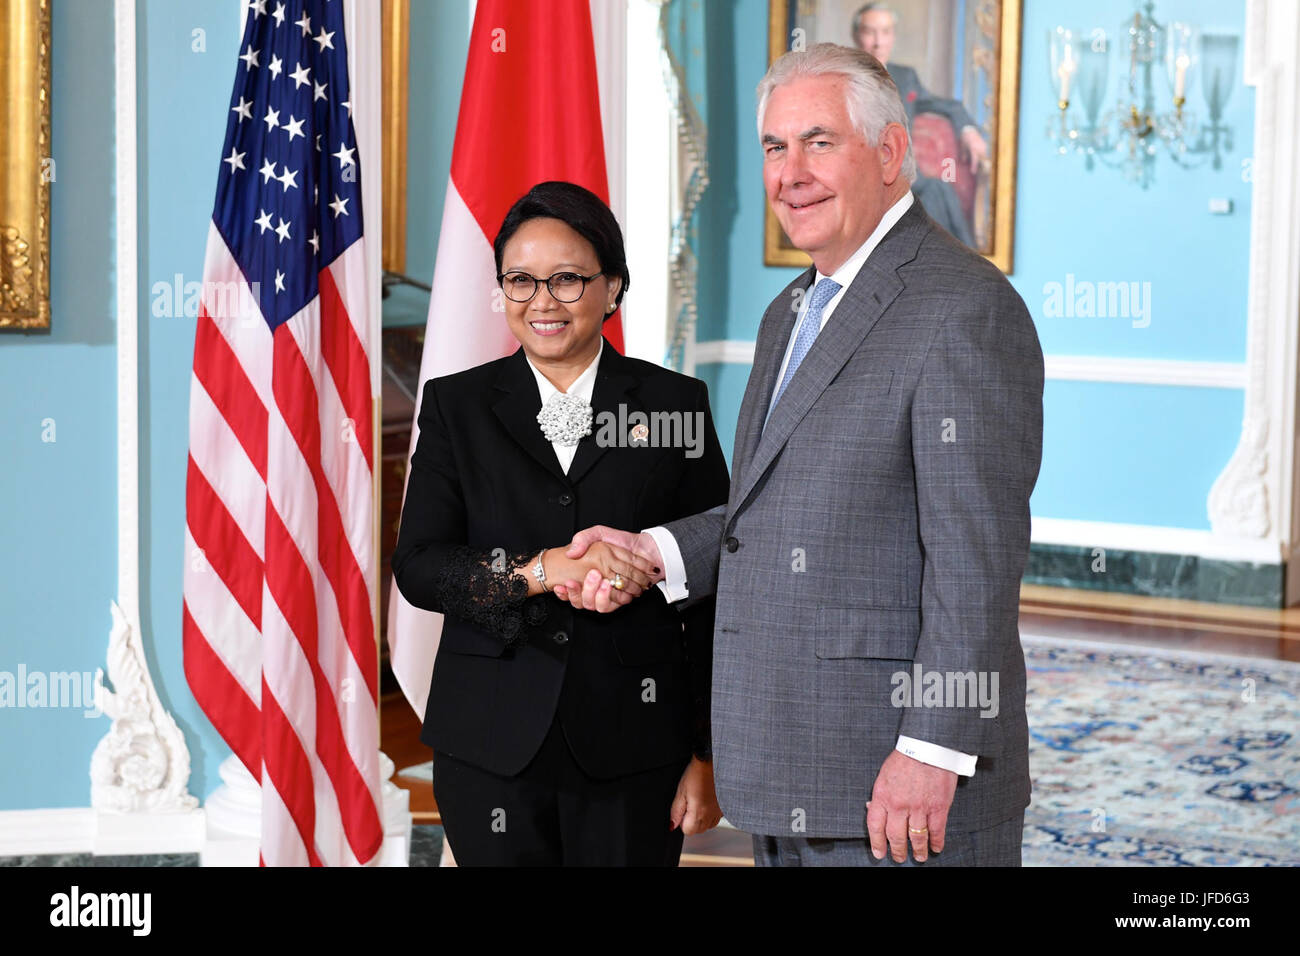 U.S. Secretary of State Rex Tillerson shakes hands with Indonesian Foreign Minister Retno Marsudi before their bilateral meeting at the U.S. Department of State in Washington, D.C., on May 4, 2017. Stock Photo